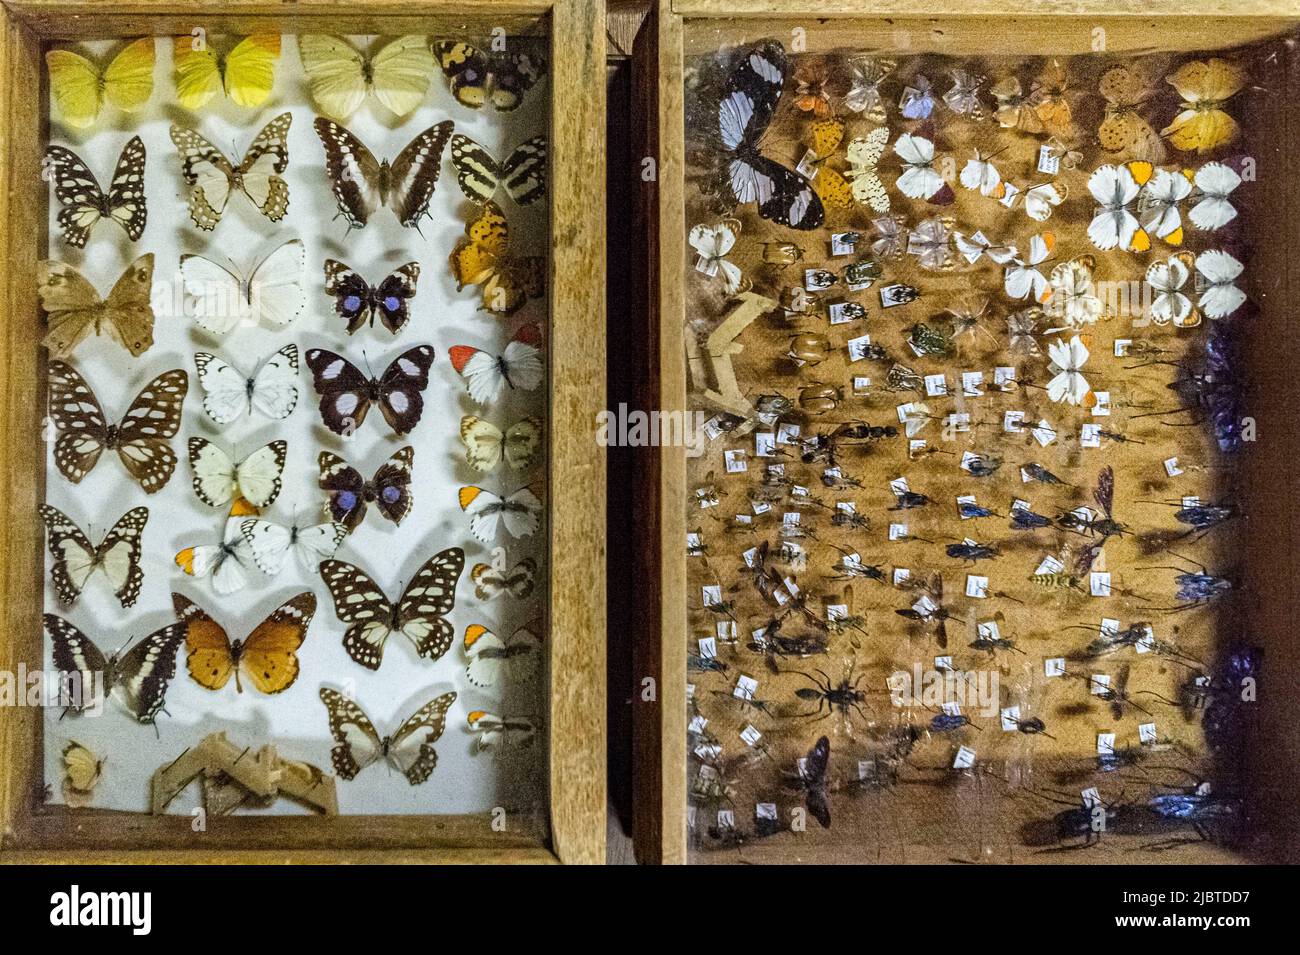 Namibia, Khomas region, Windhoek, National Museum of Natural History, Department of Entomology collection Stock Photo